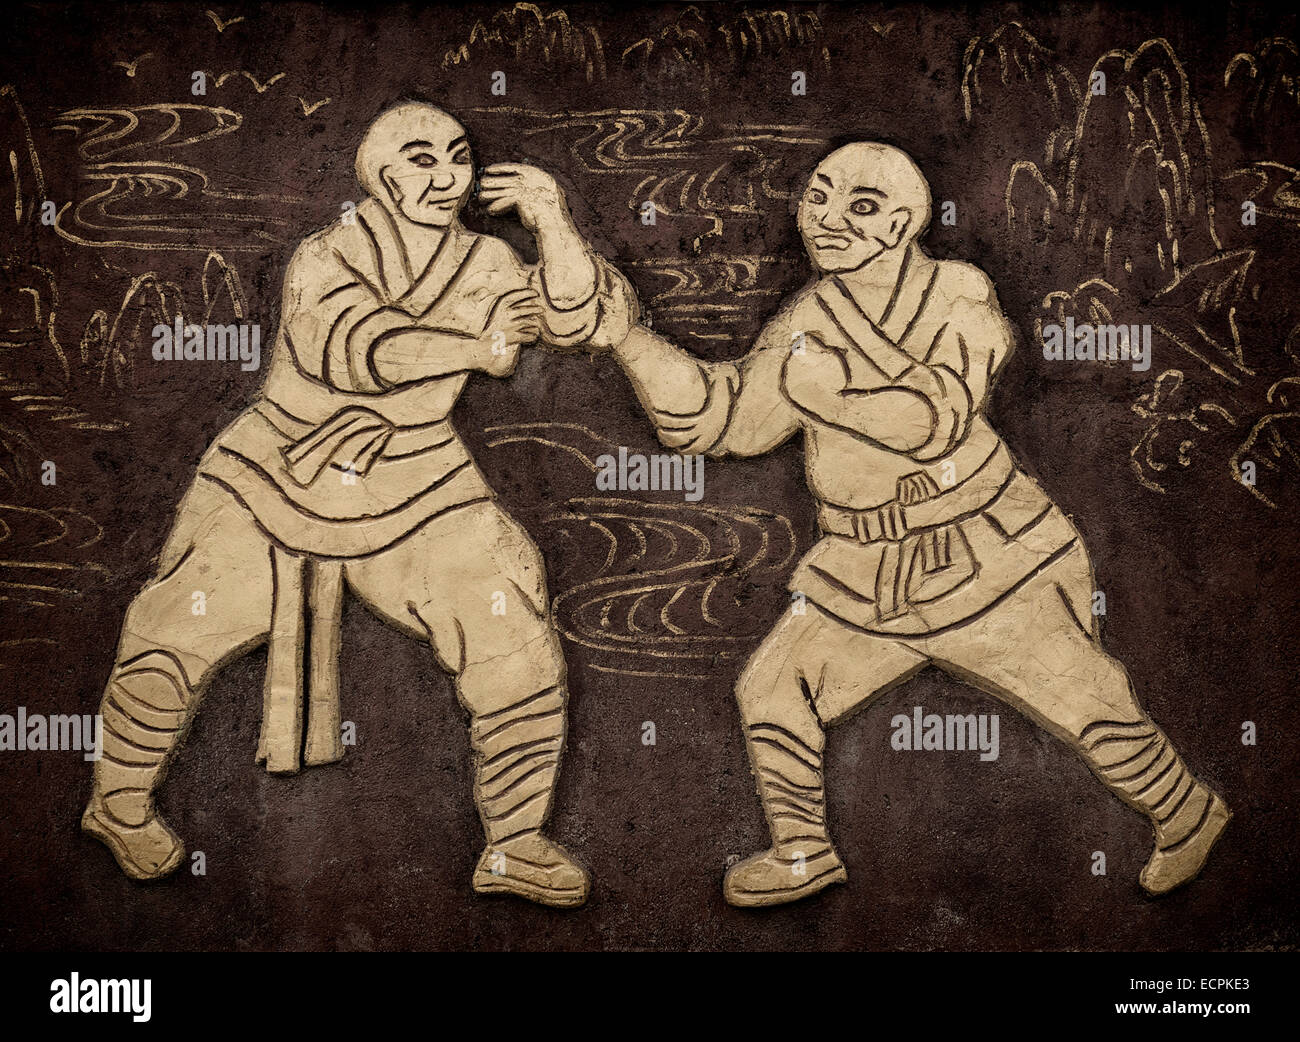 License available at MaximImages.com - Monks practicing Kung Fu artwork on a wall near Shaolin Temple in DengFeng, Henan, China Stock Photo